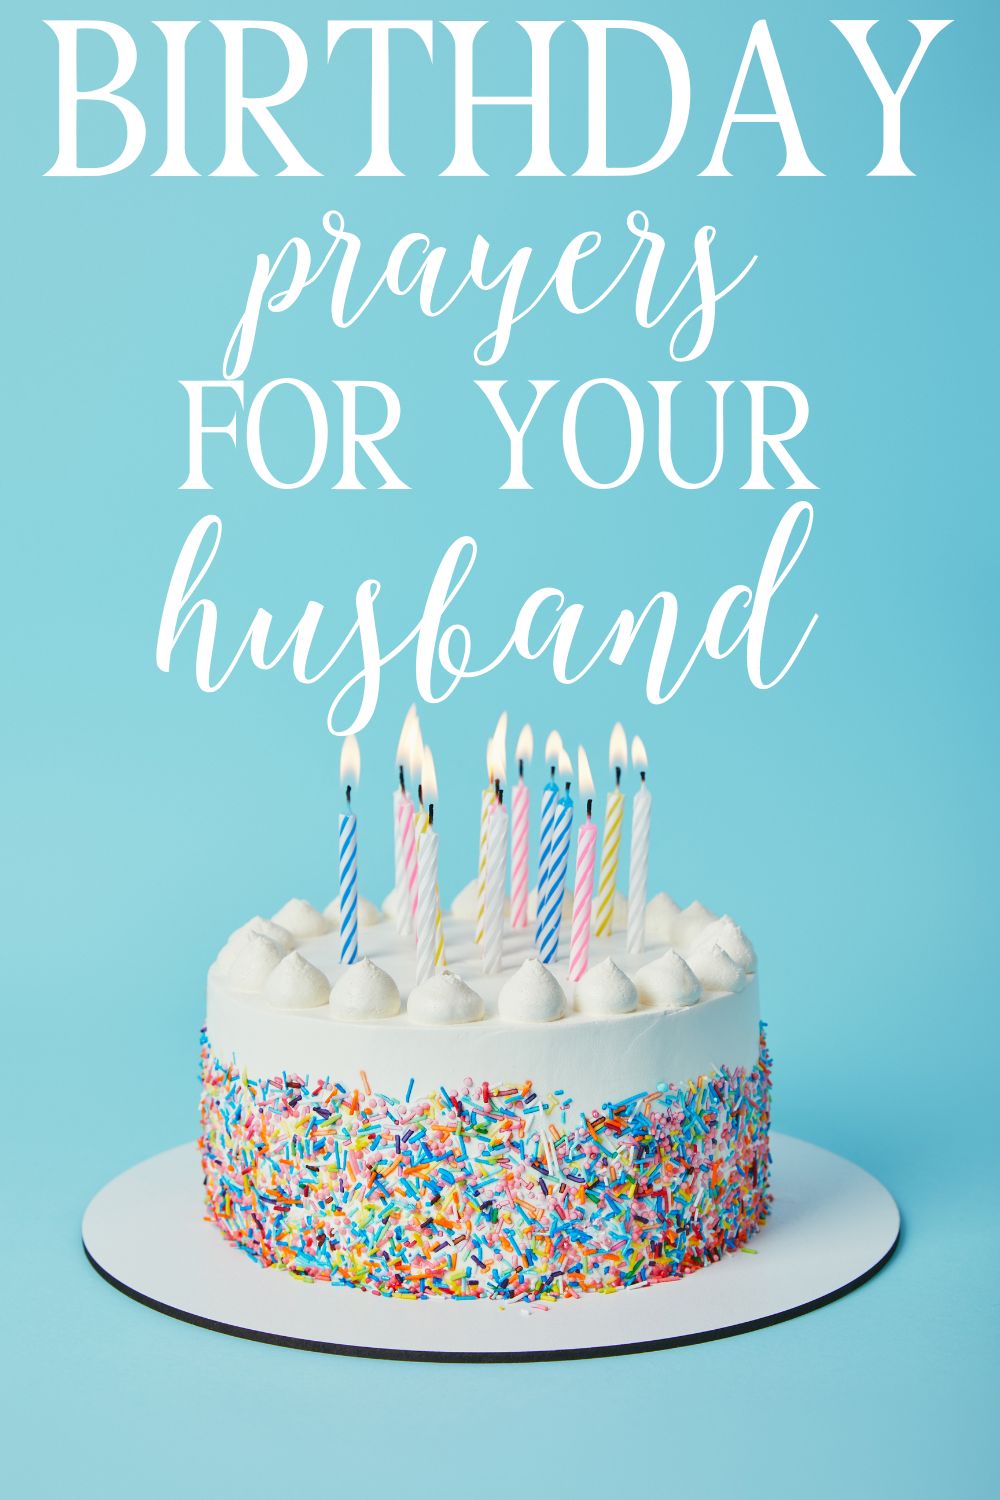 Ageless Wishes & Blessings: 25+ Inspiring Birthday Prayers for Your Husband